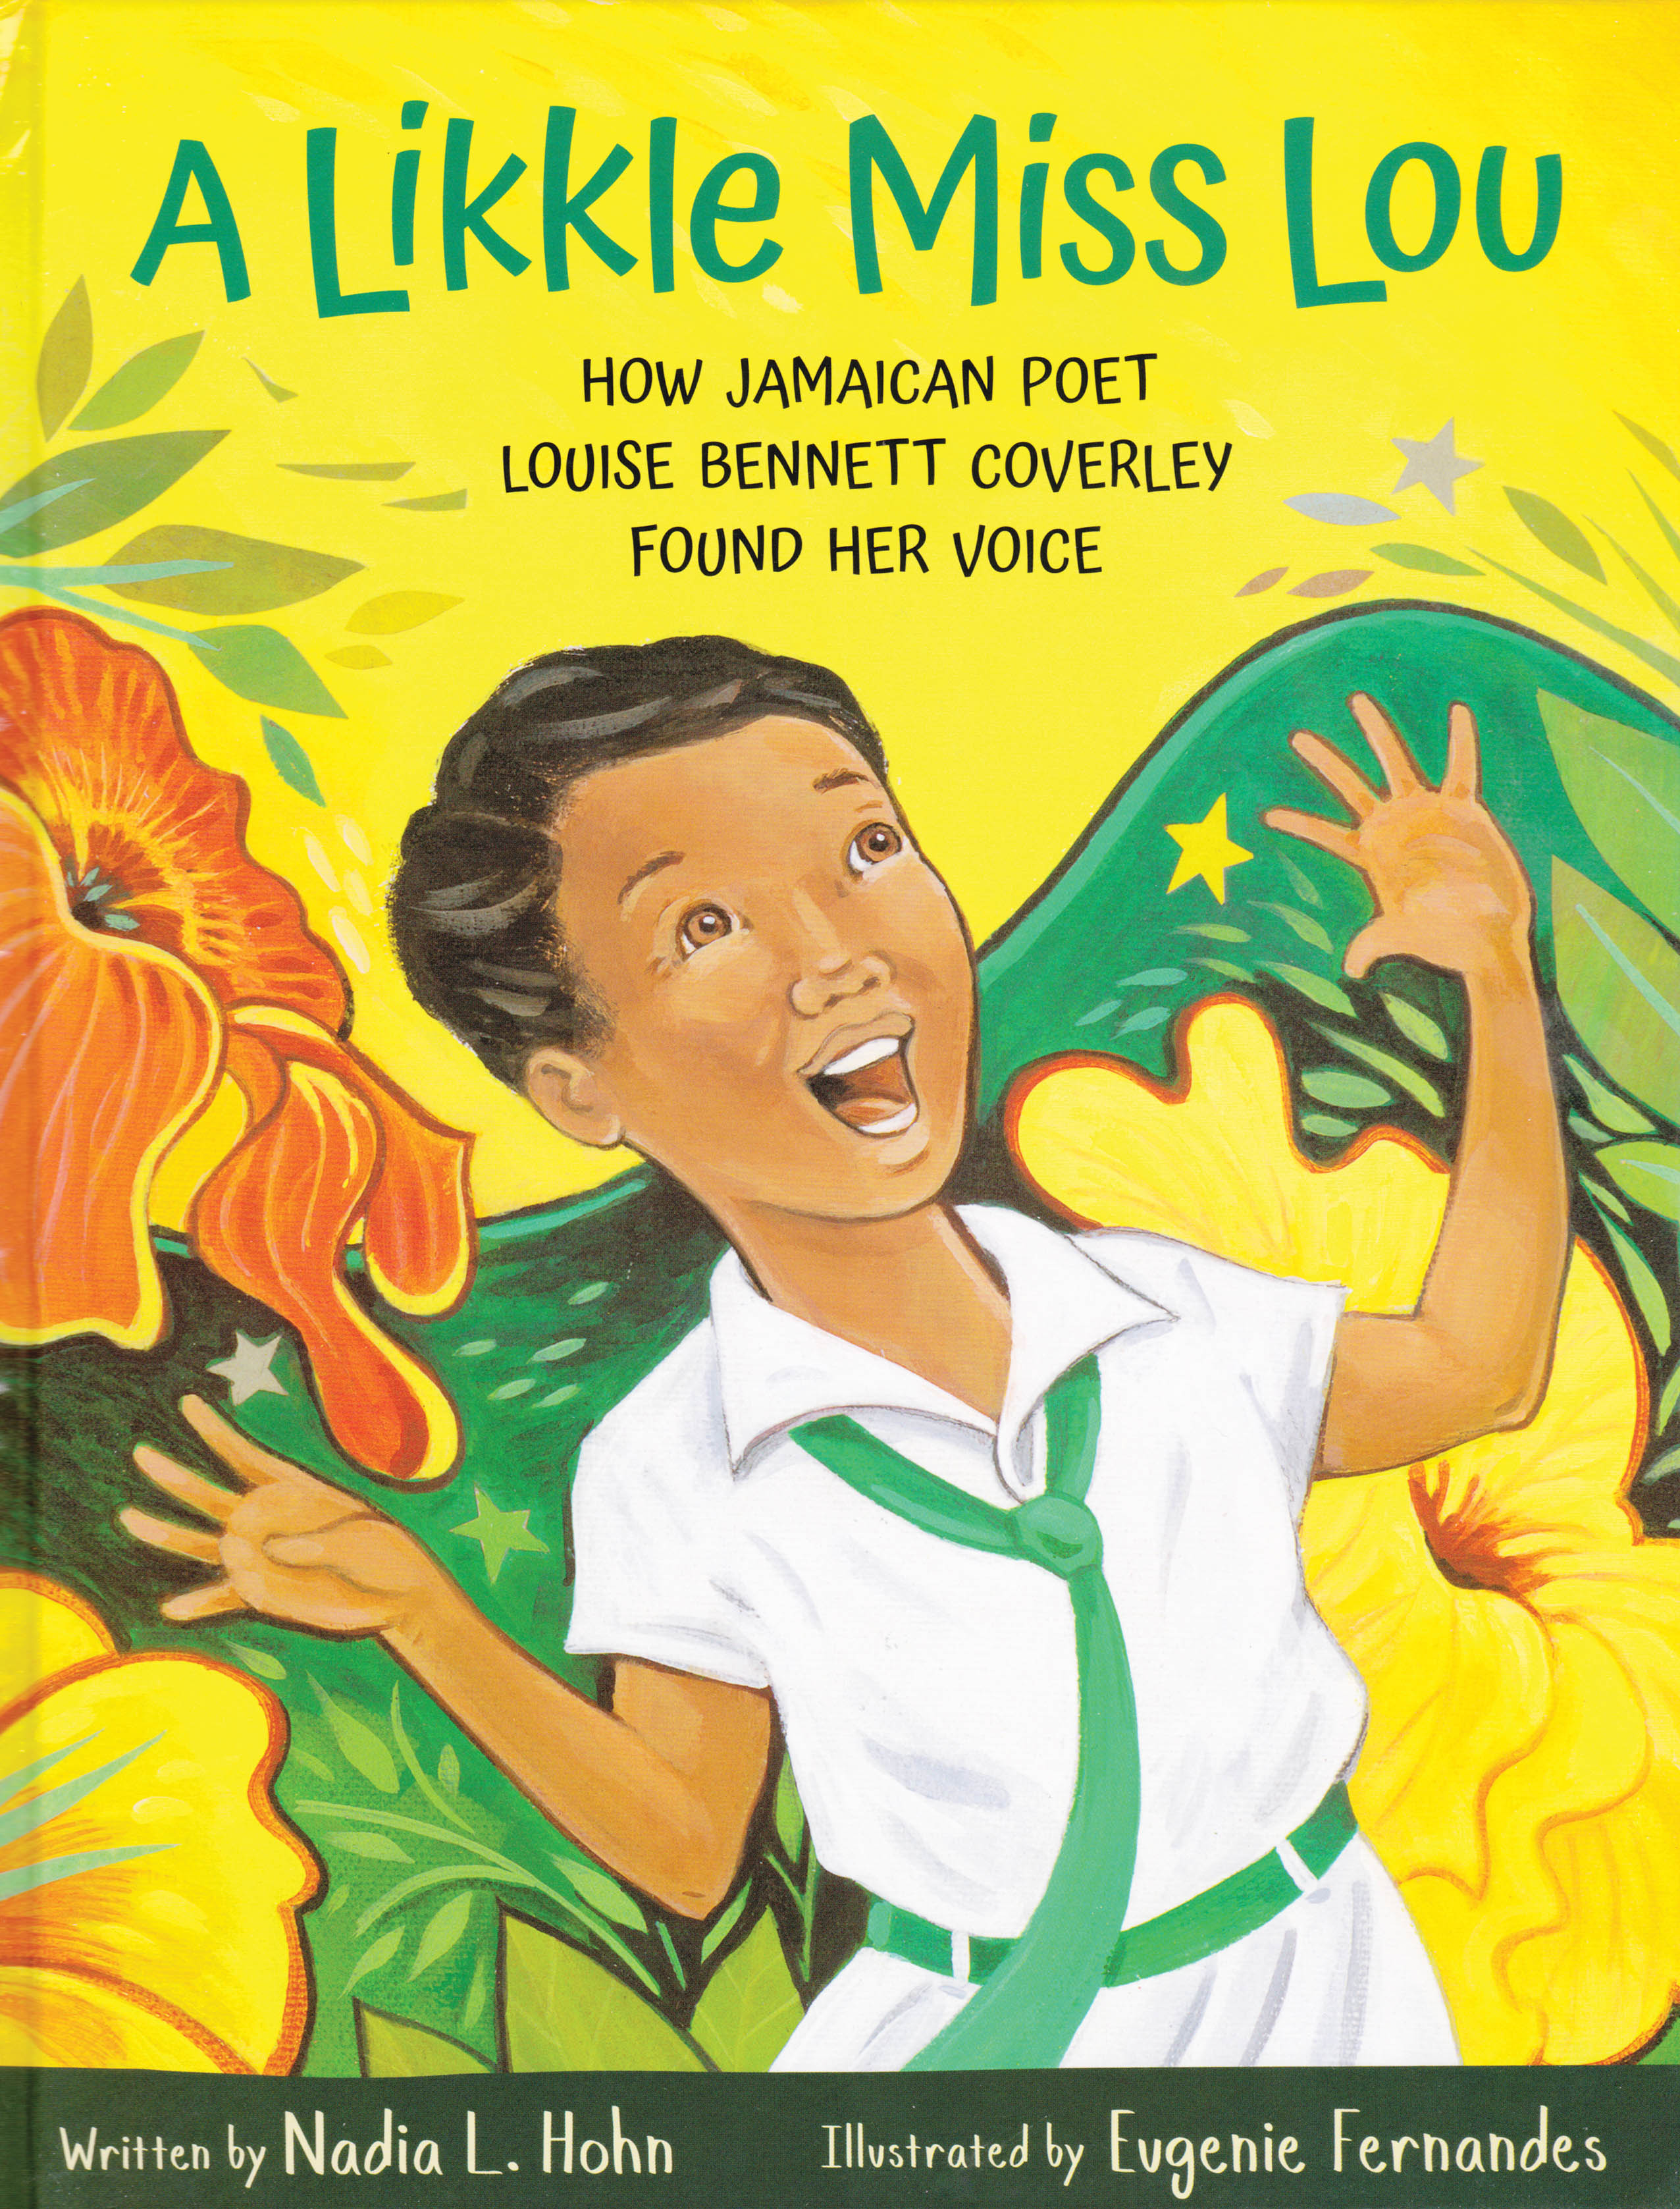 'A Likkle Miss Lou' book cover